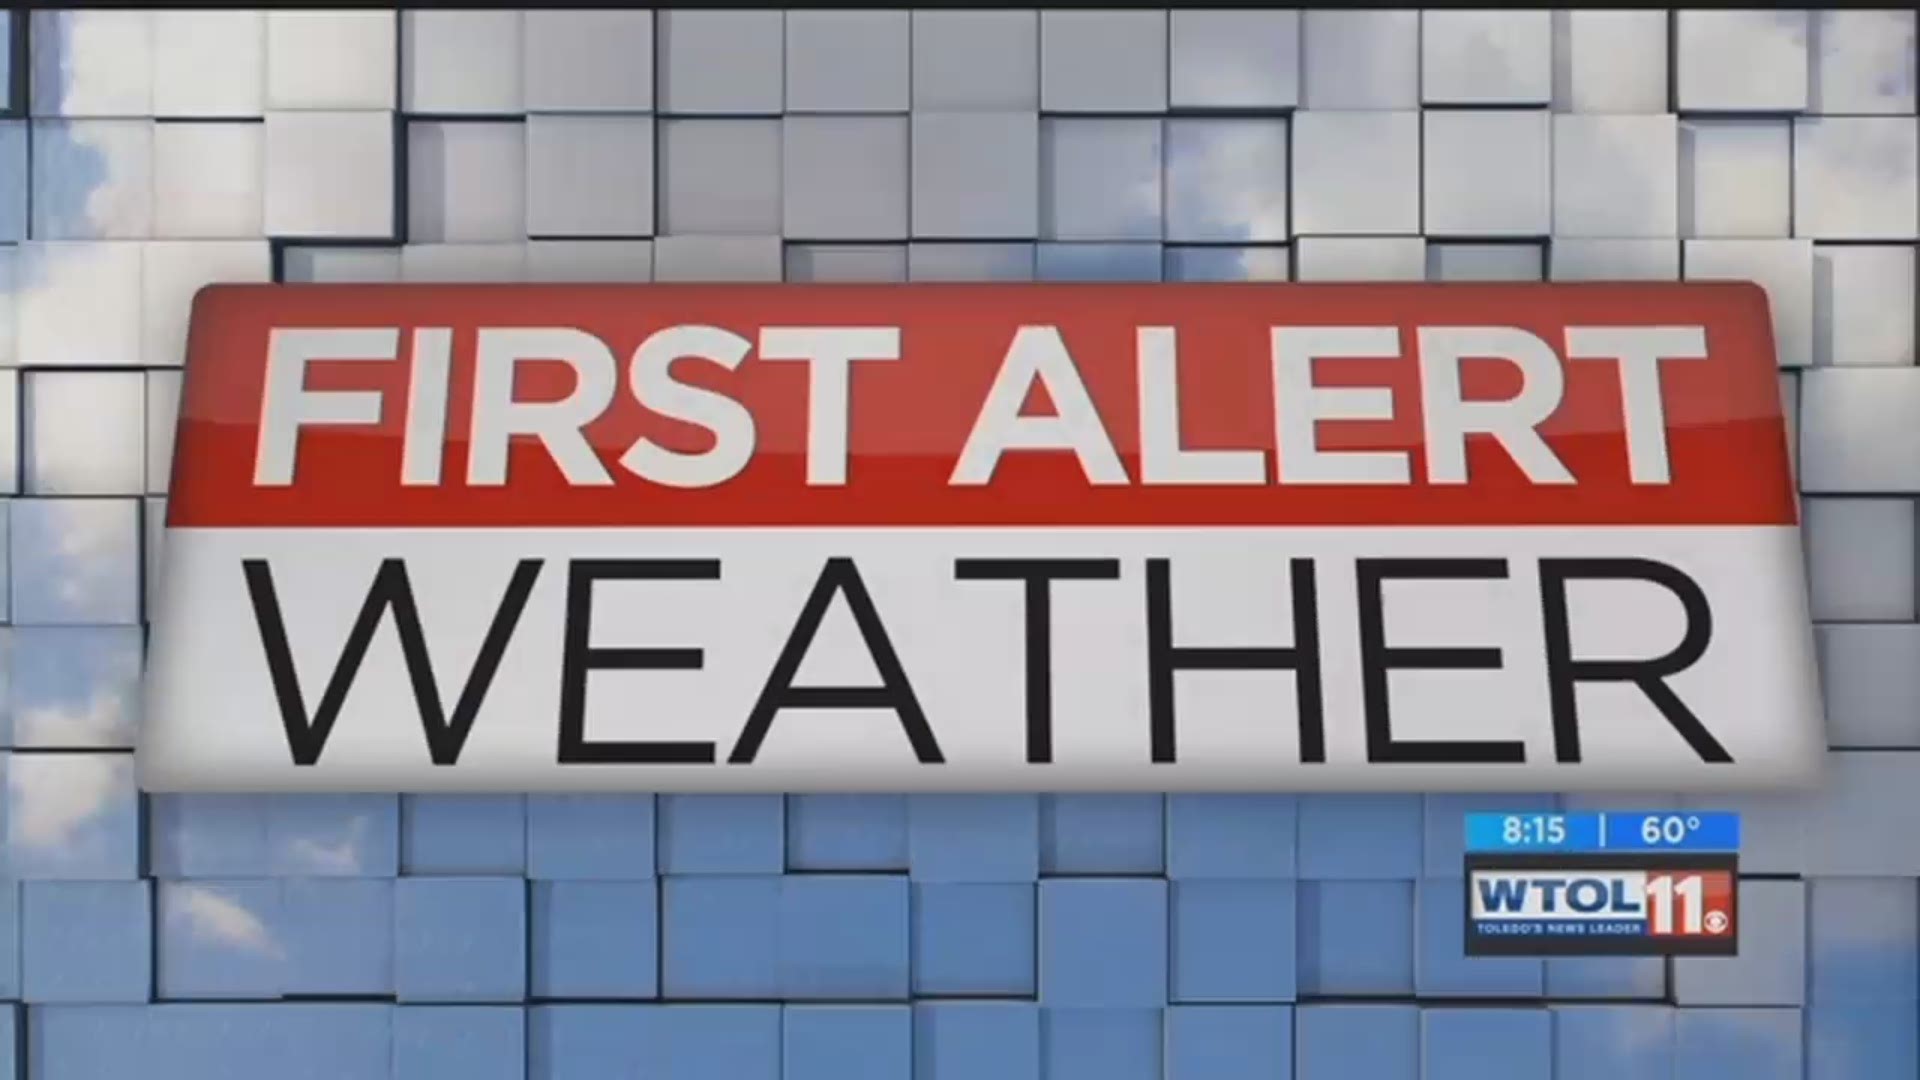 First Alert Forecast: Lower humidity and cooler temperatures